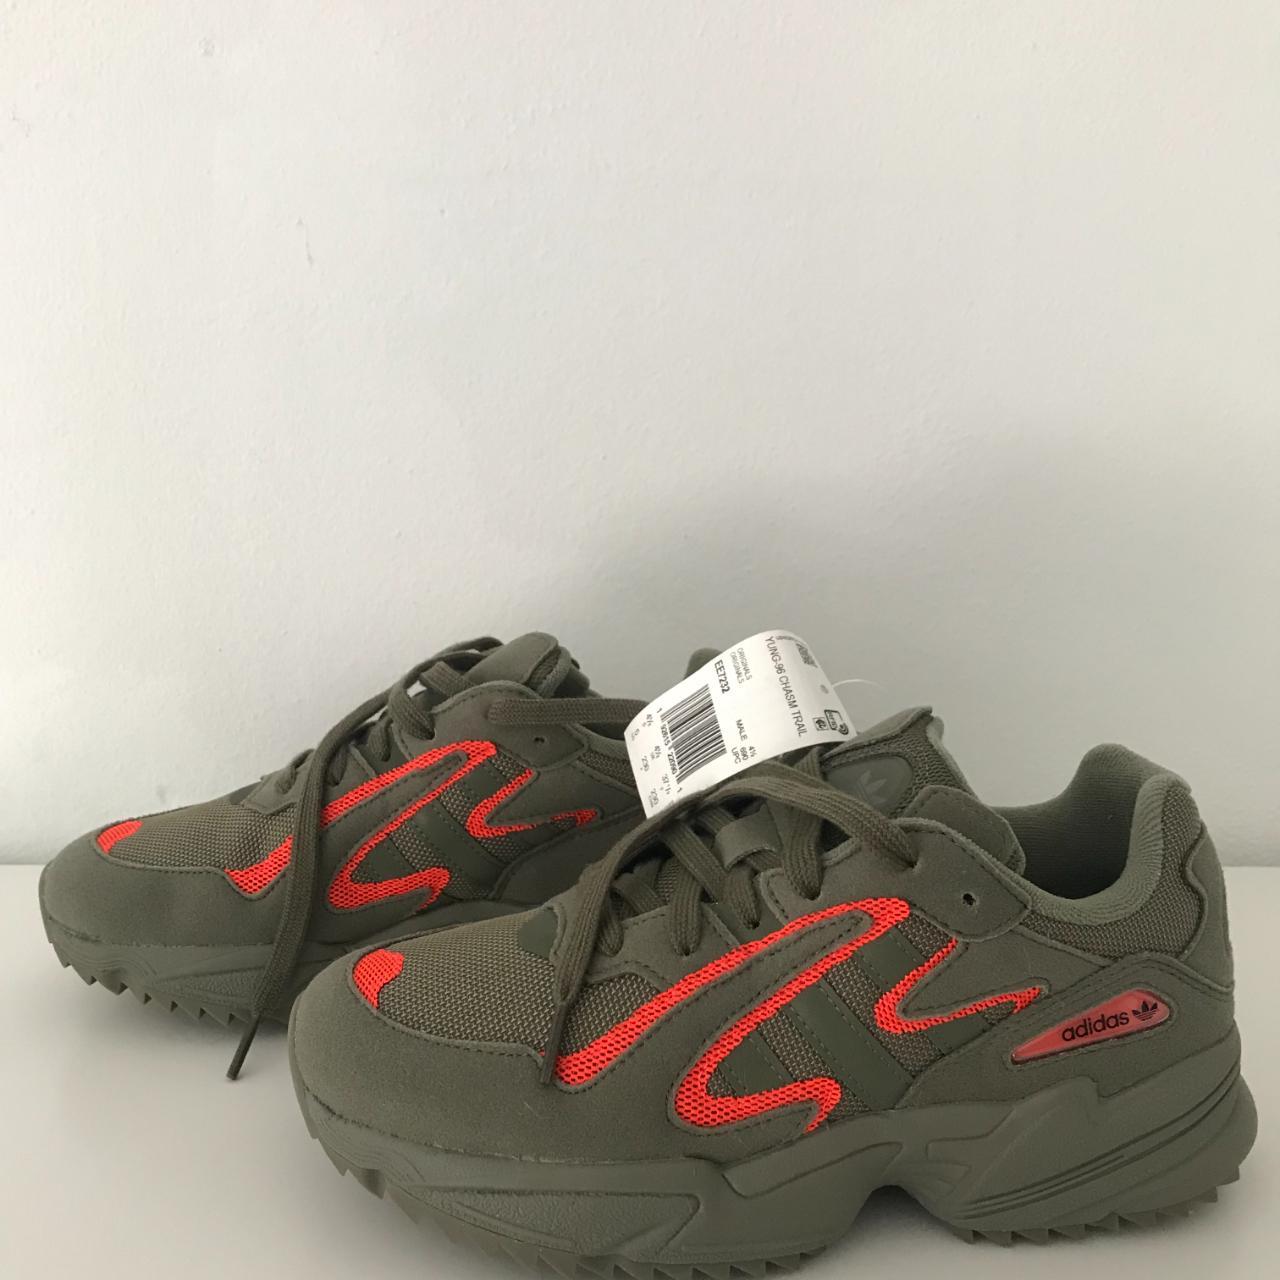 shit prototype Maan Adidas Yung-96 Chasm Trail Sneakers. Size 6.5 Women... - Depop